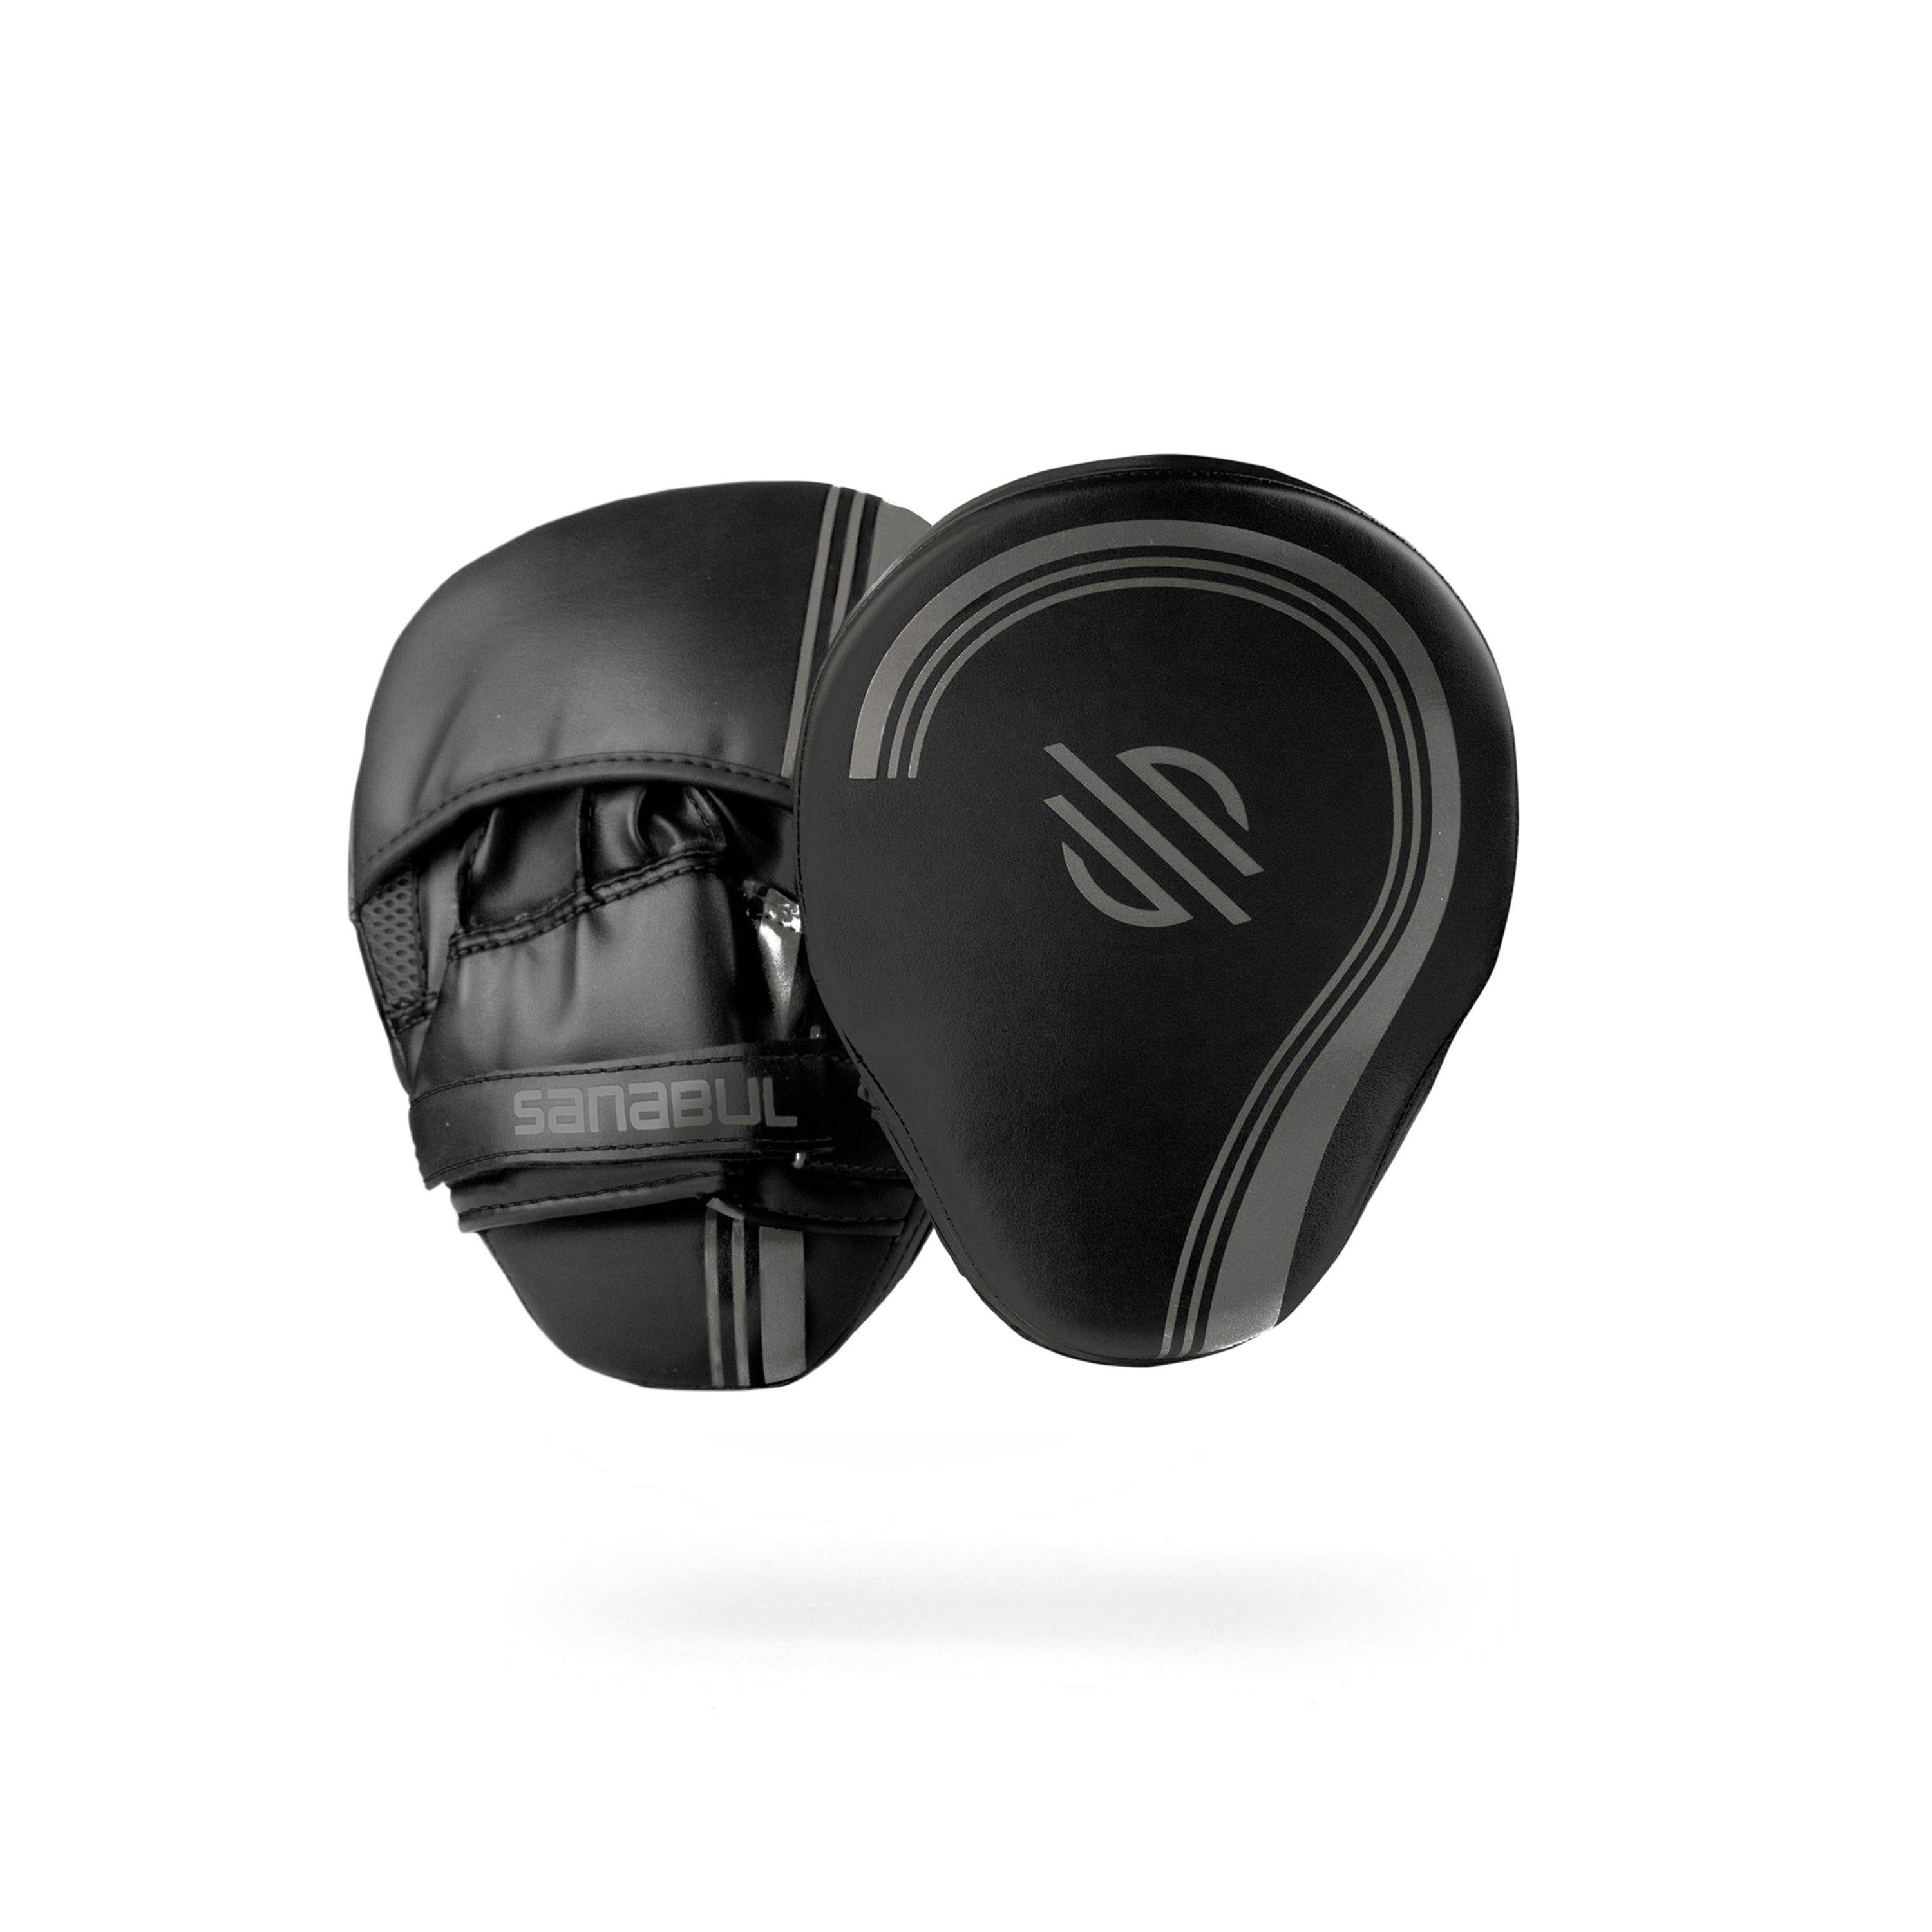 CORE Series Boxing Mitts